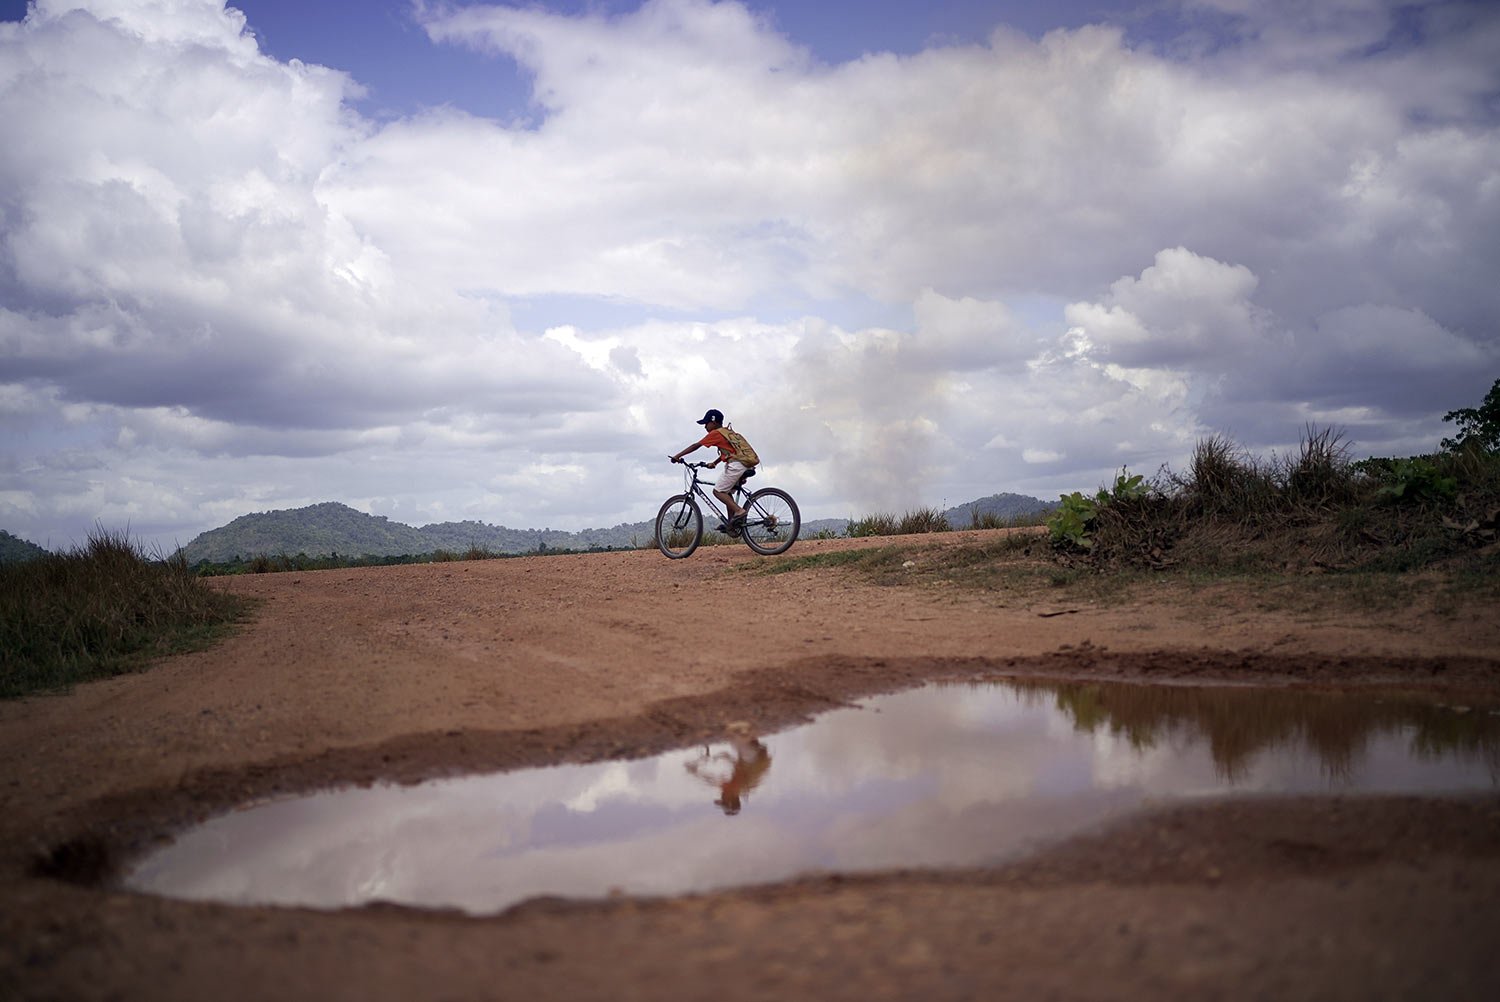  A youth rides a bicycle through the village of Wowetta, located in the Essequibo, Guayana, Nov. 18, 2023. Venezuela has long claimed Guyana’s Essequibo region — a territory larger than Greece and rich in oil and minerals. (AP Photo/Juan Pablo Arraez